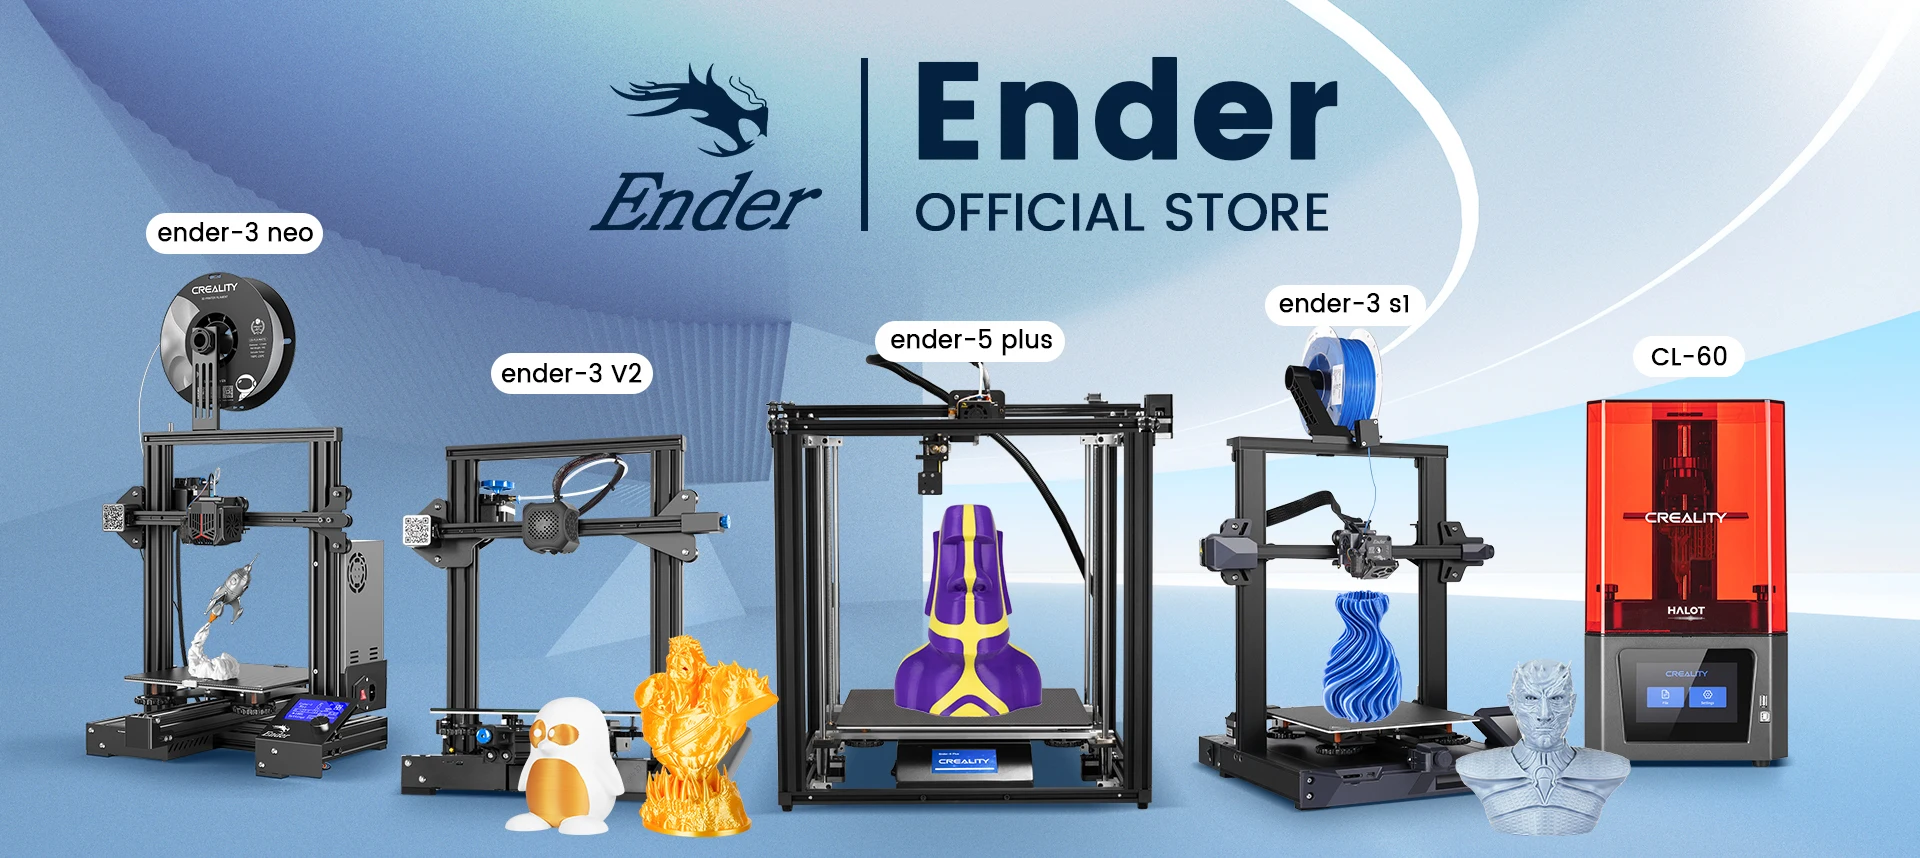 Ender Official Store - Amazing products with exclusive discounts